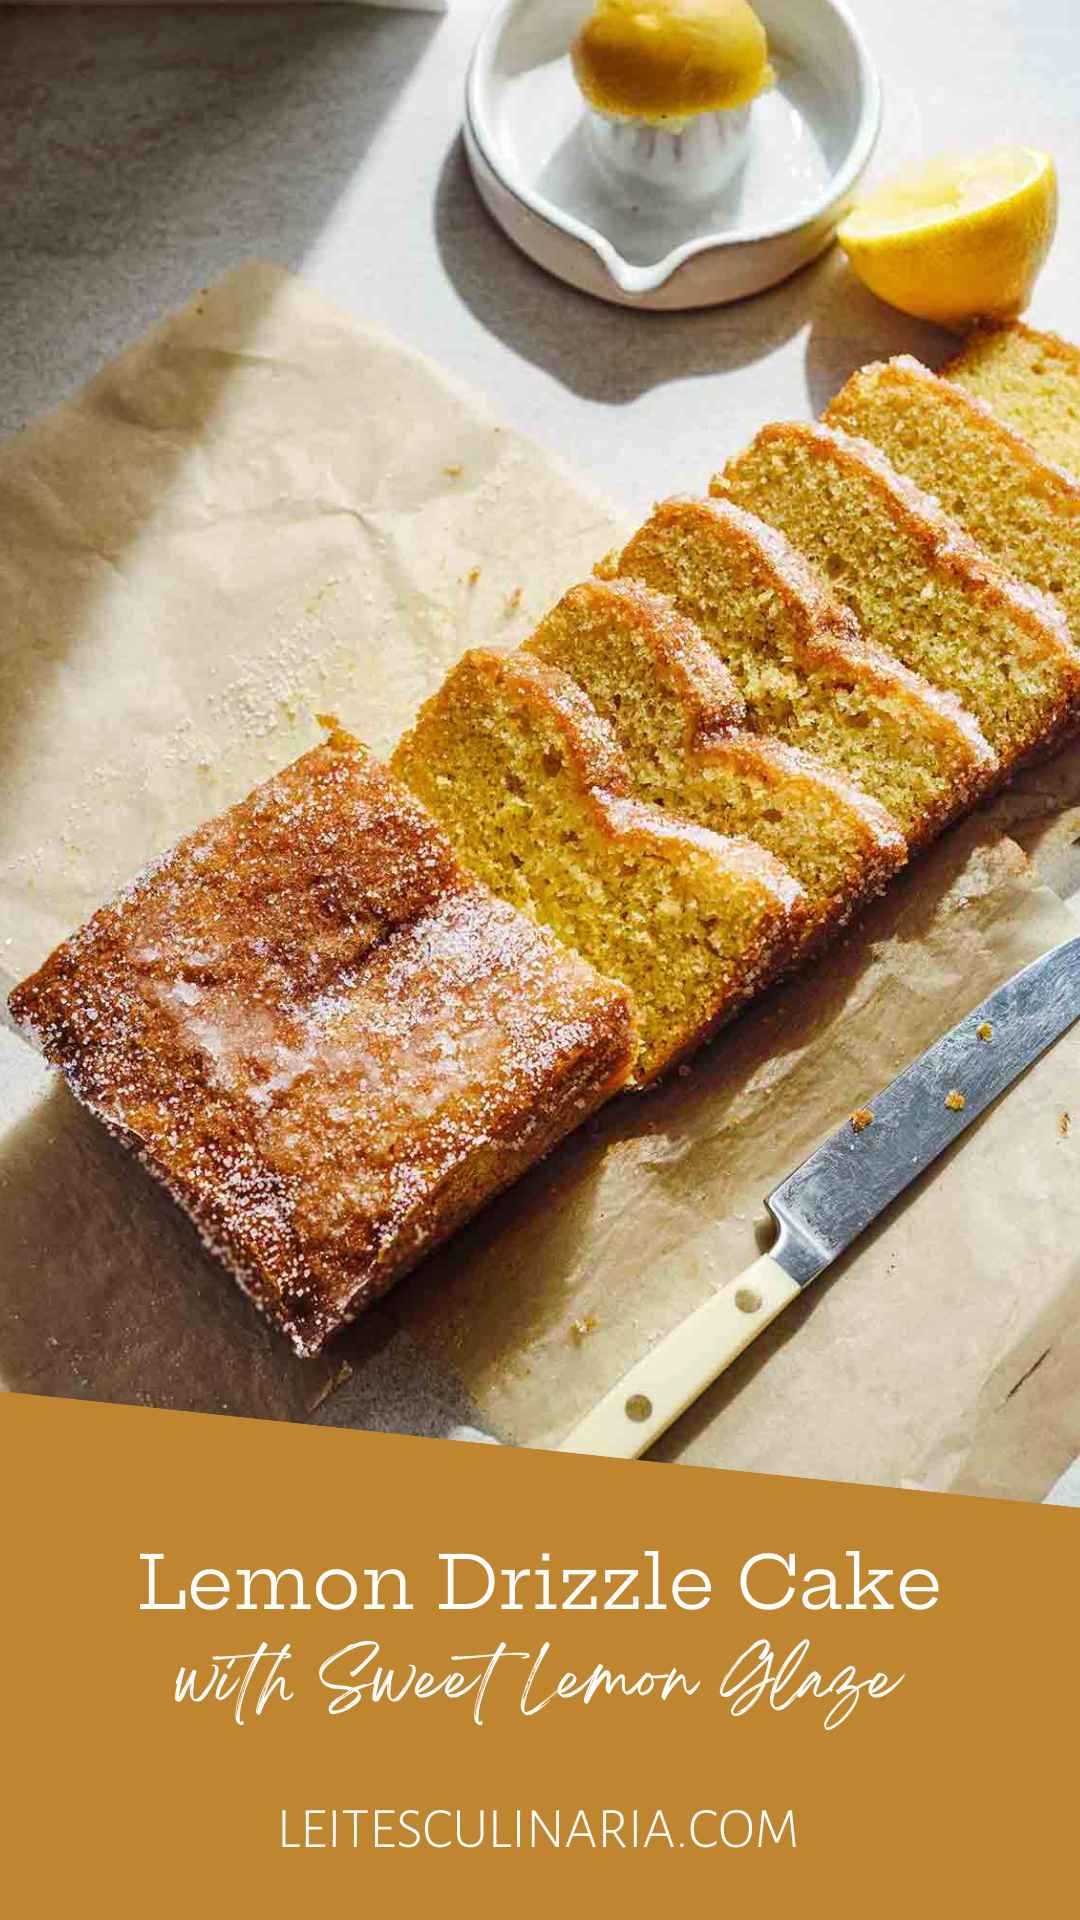 A partially sliced lemon drizzle cake with sugar topping on a piece of parchment paper.